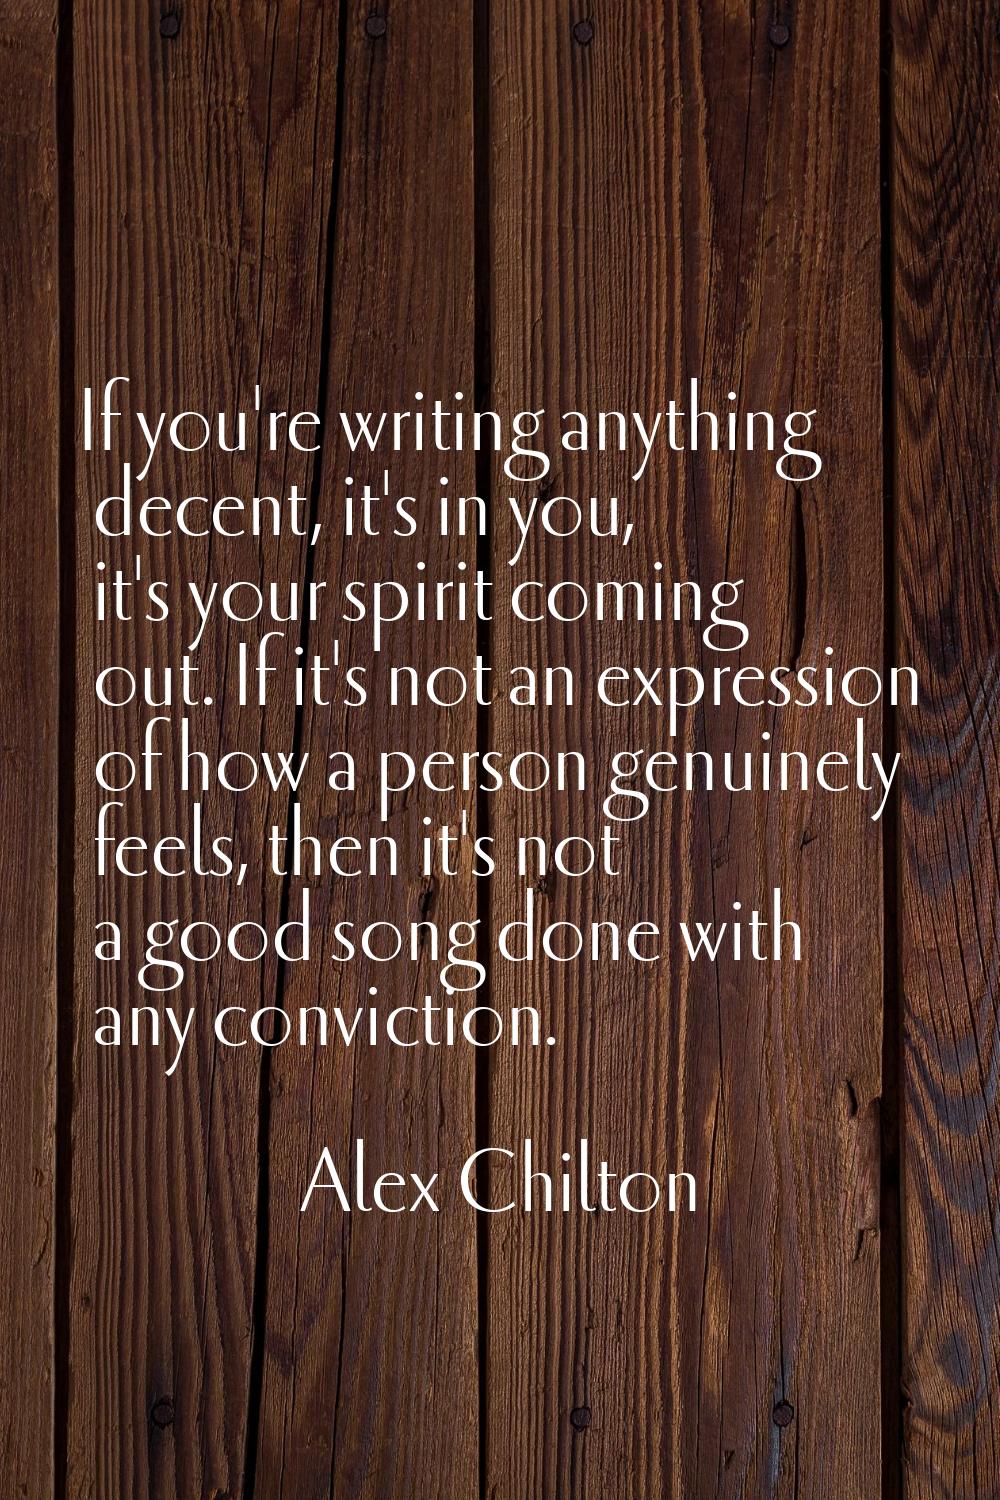 If you're writing anything decent, it's in you, it's your spirit coming out. If it's not an express